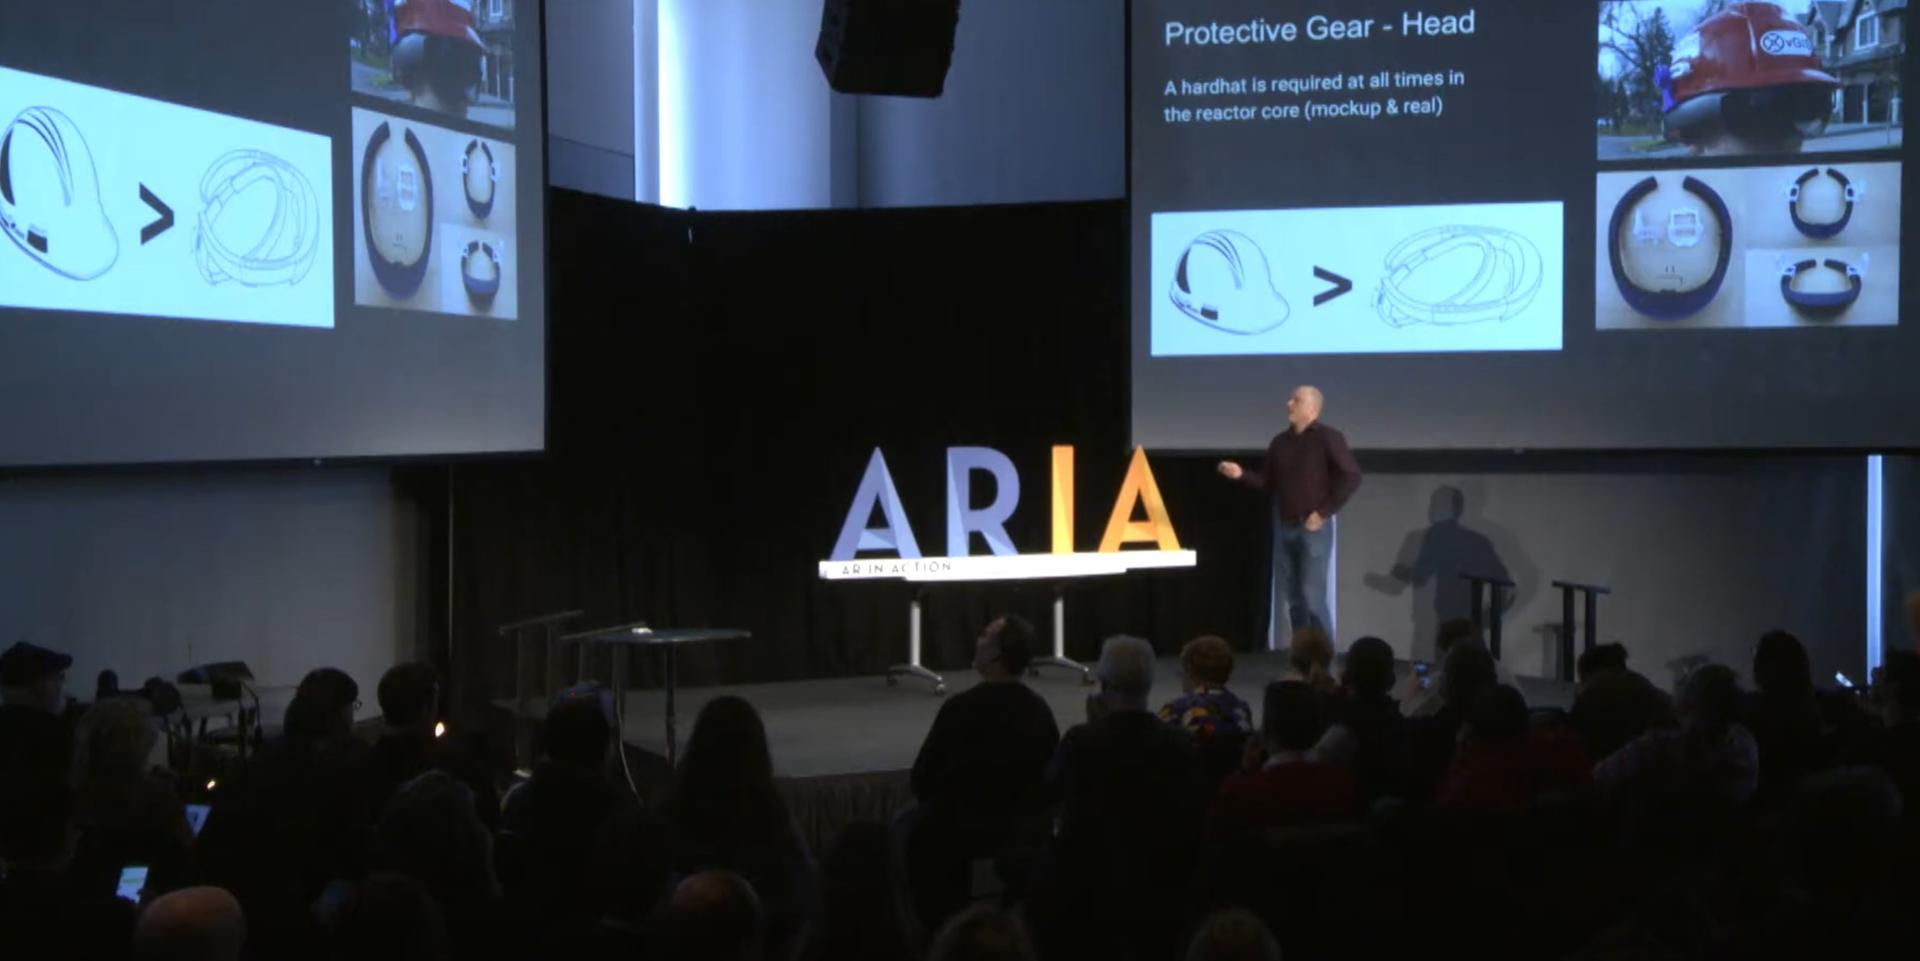 AR in the reactor core – a talk I gave at MIT Media Lab